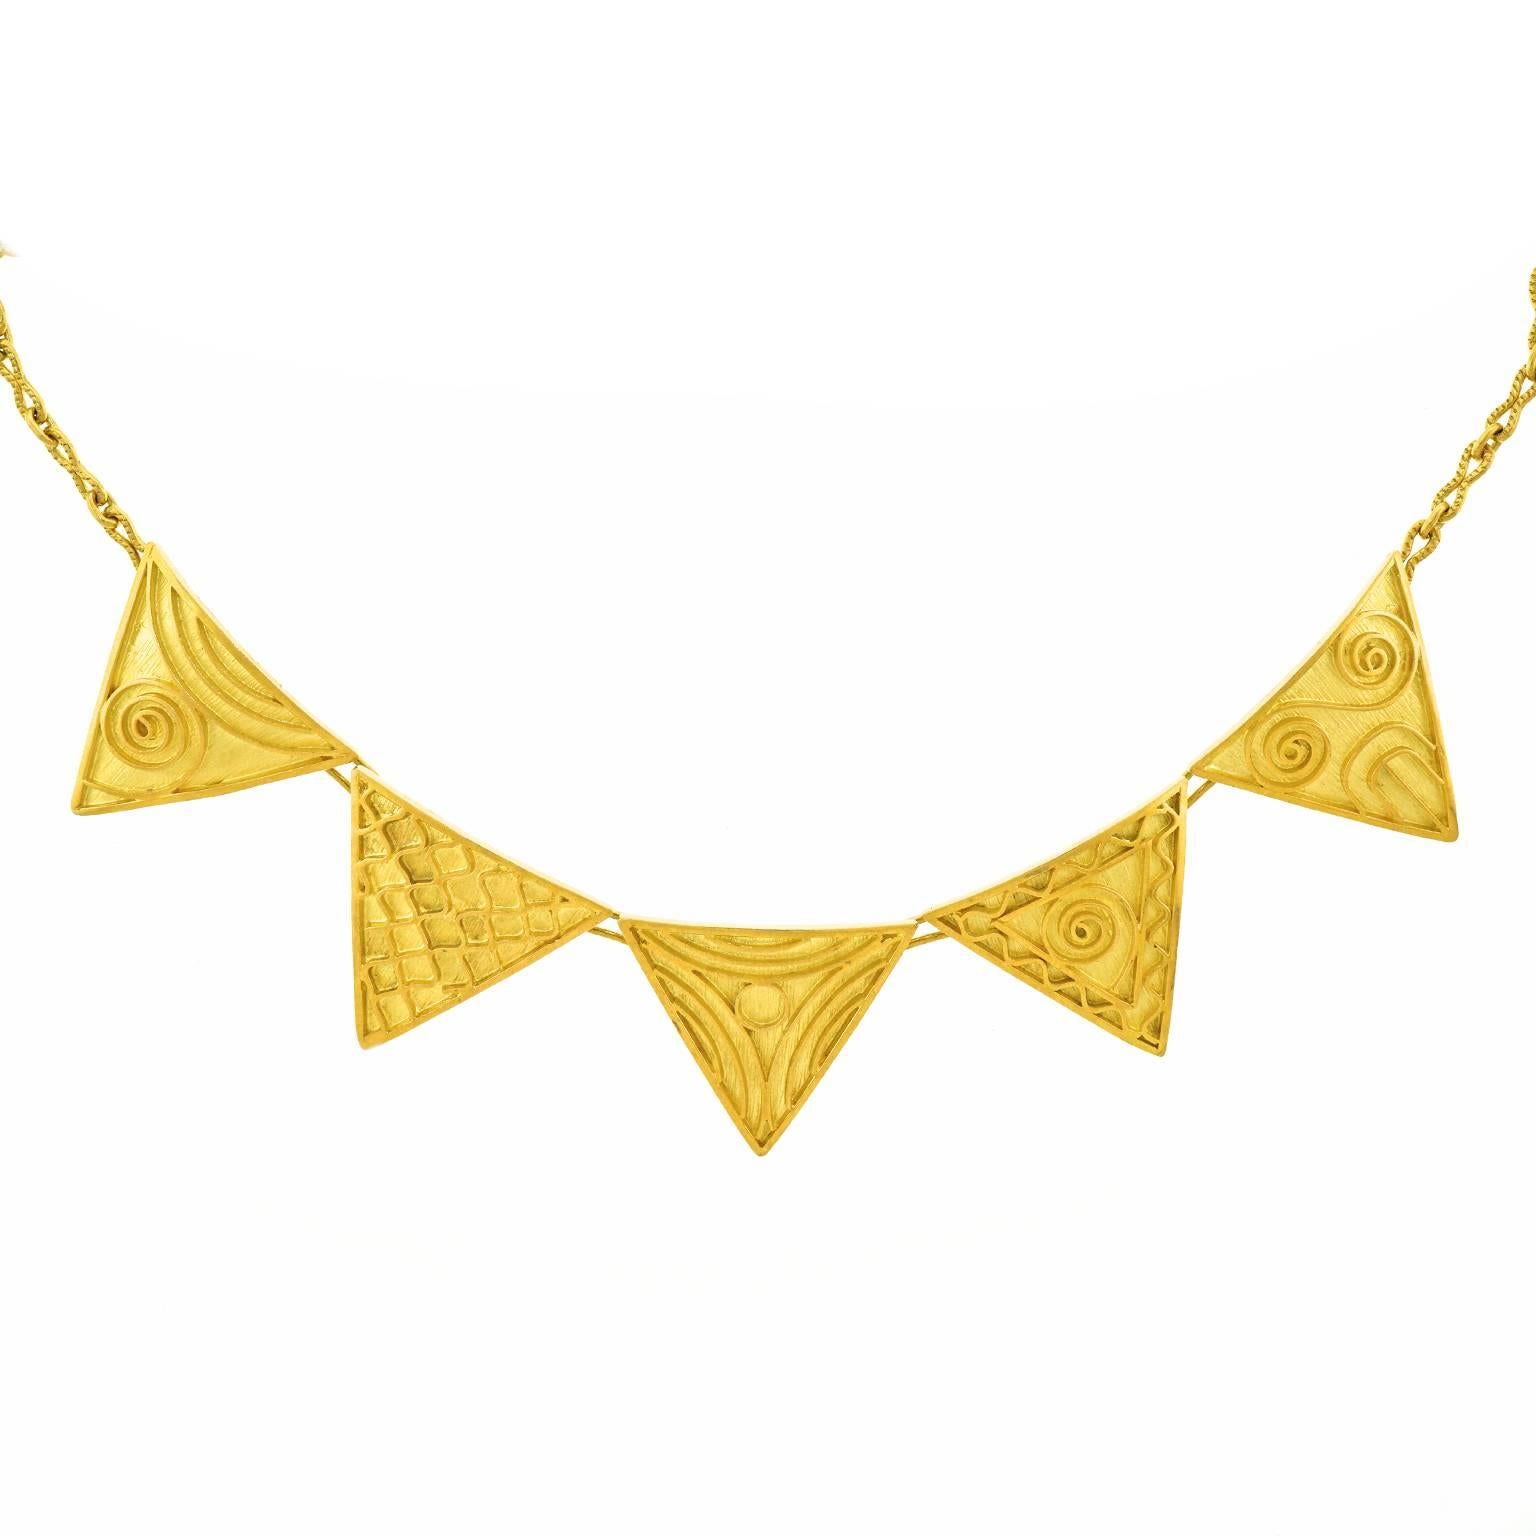 1970s French Organo-Chic Gold Necklace